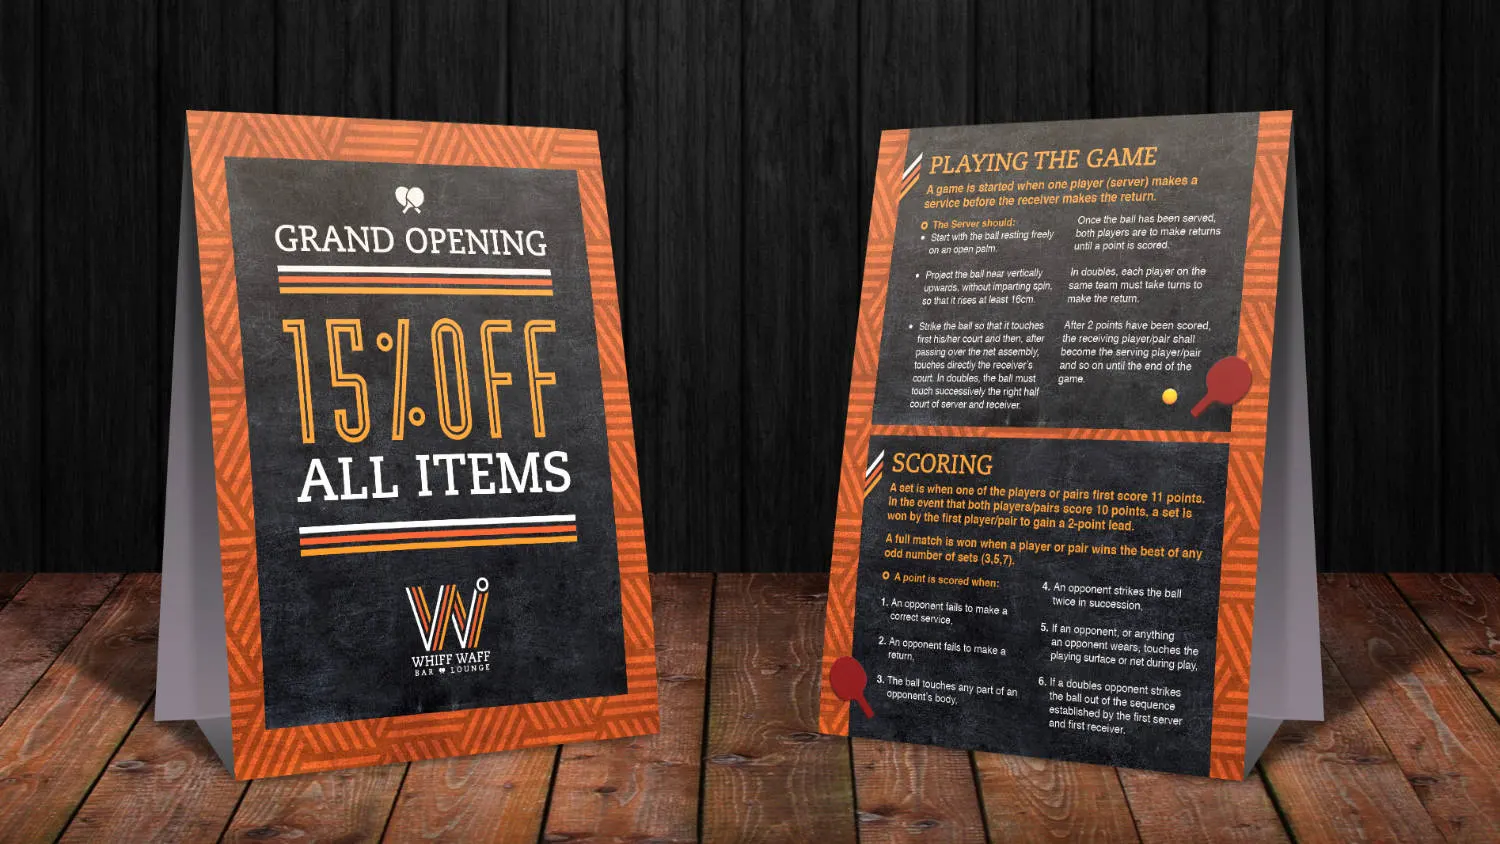 Graphic design project for Whiff Waff Bar & Lounge. Designed the store promotion table stand